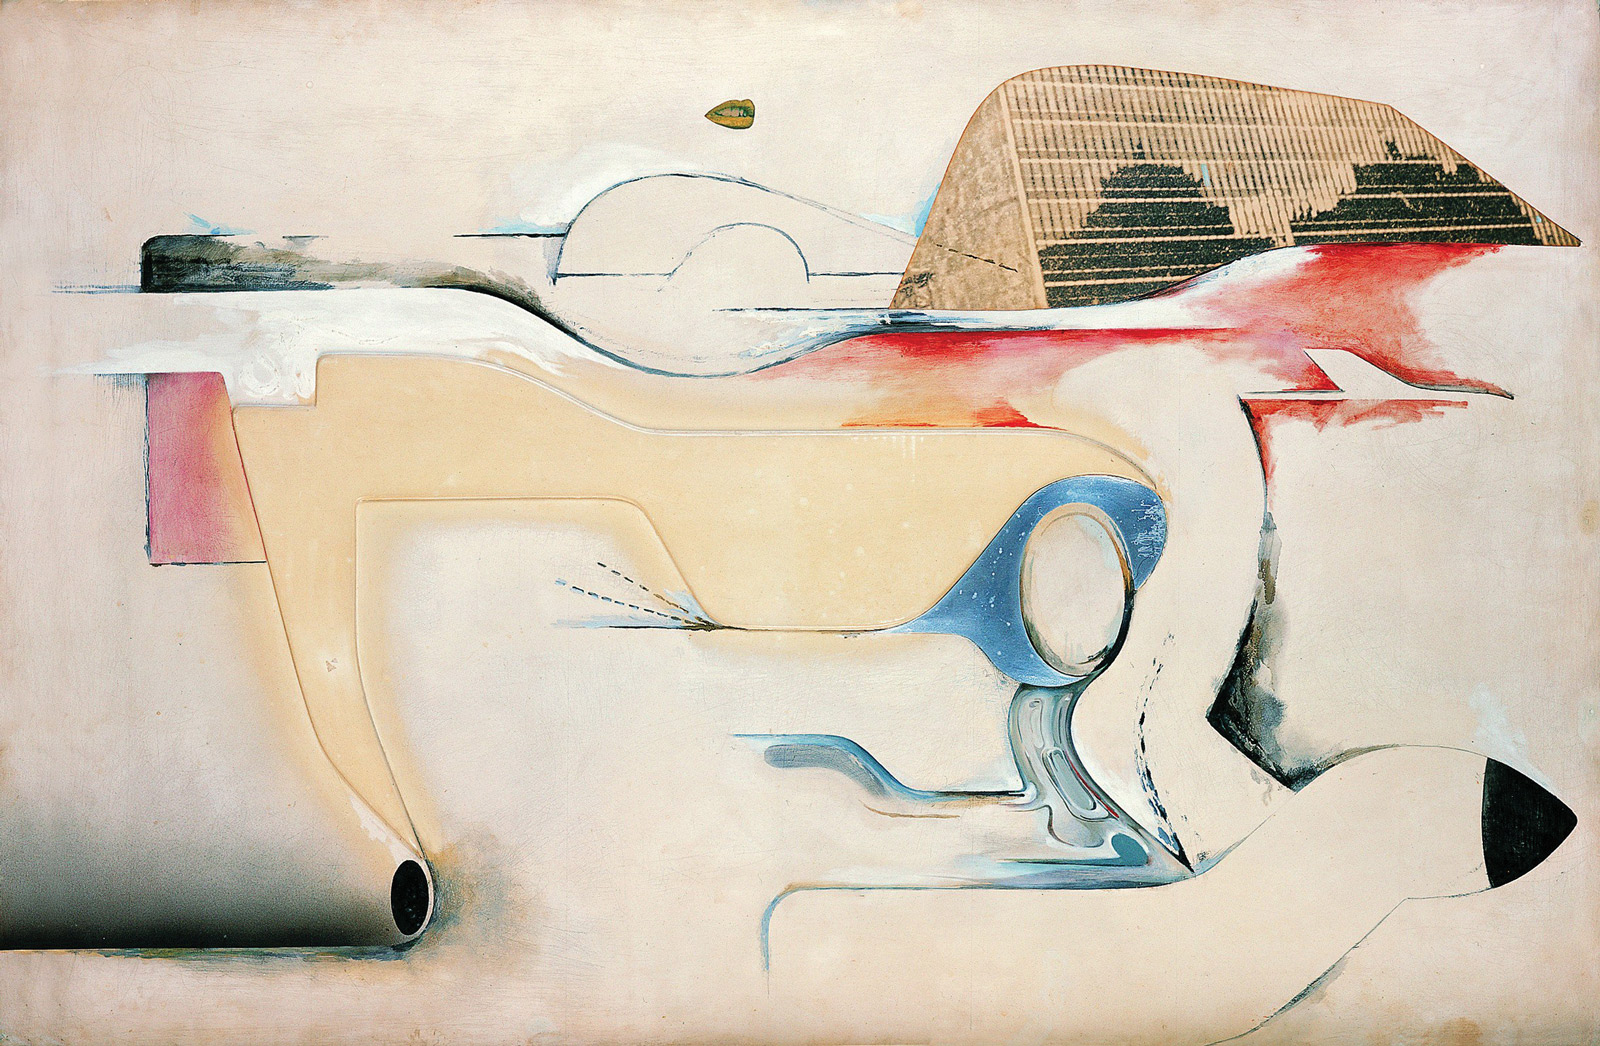 The nineteen fifty eight painting “Hers Is a Lush Situation” by Richard Hamilton, a dynamic abstraction of vehicular and industrial figurations.